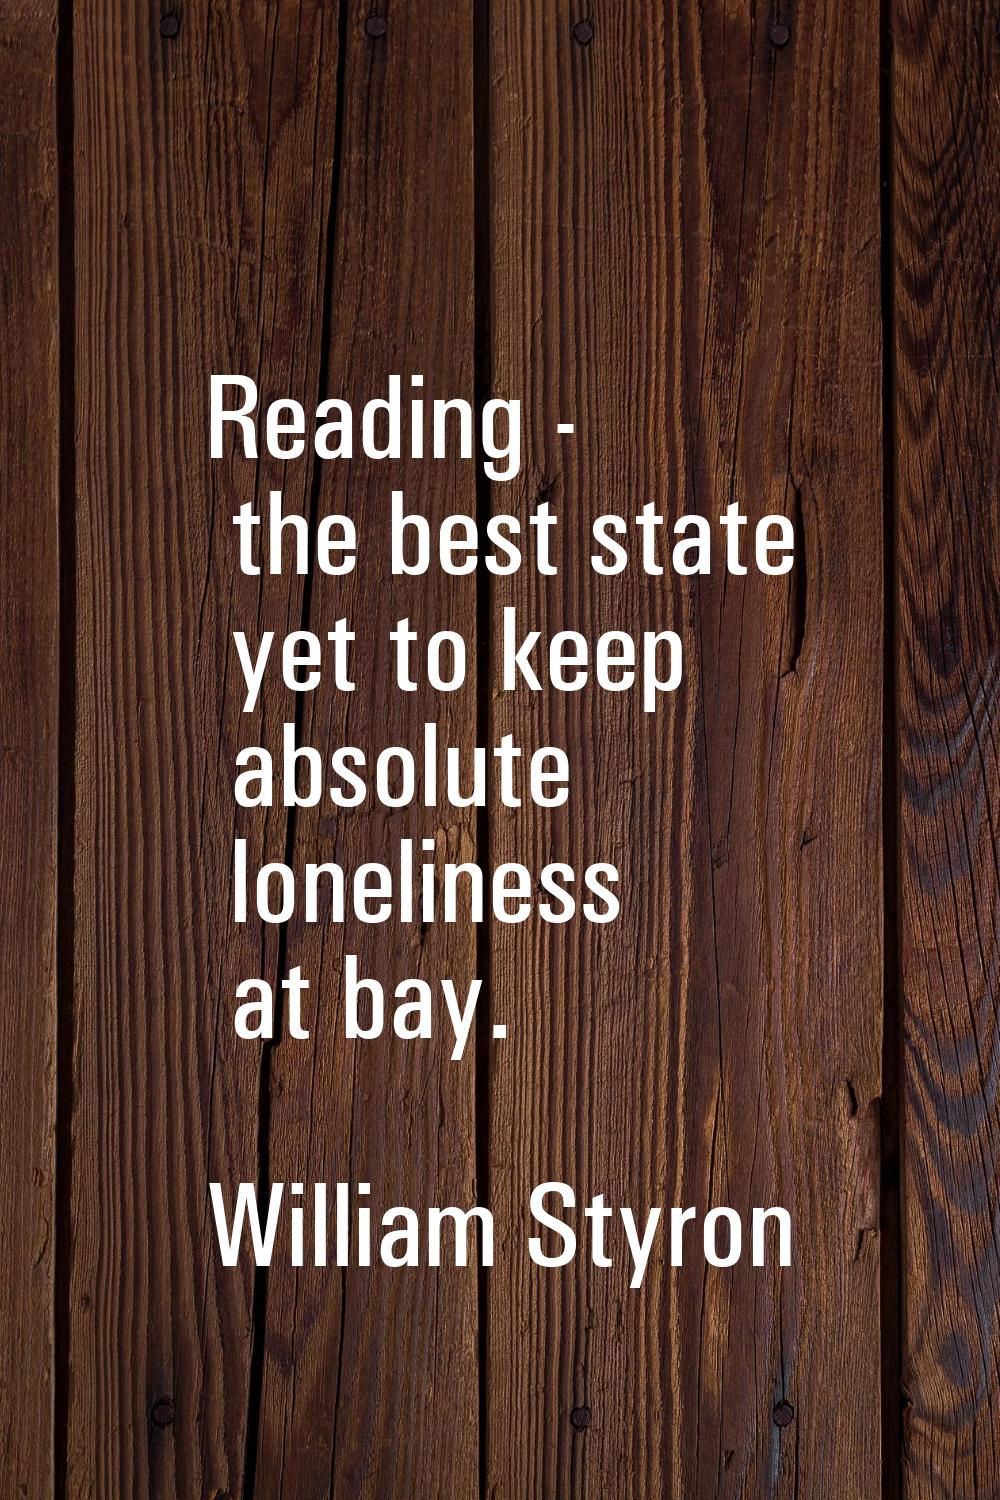 Reading - the best state yet to keep absolute loneliness at bay.